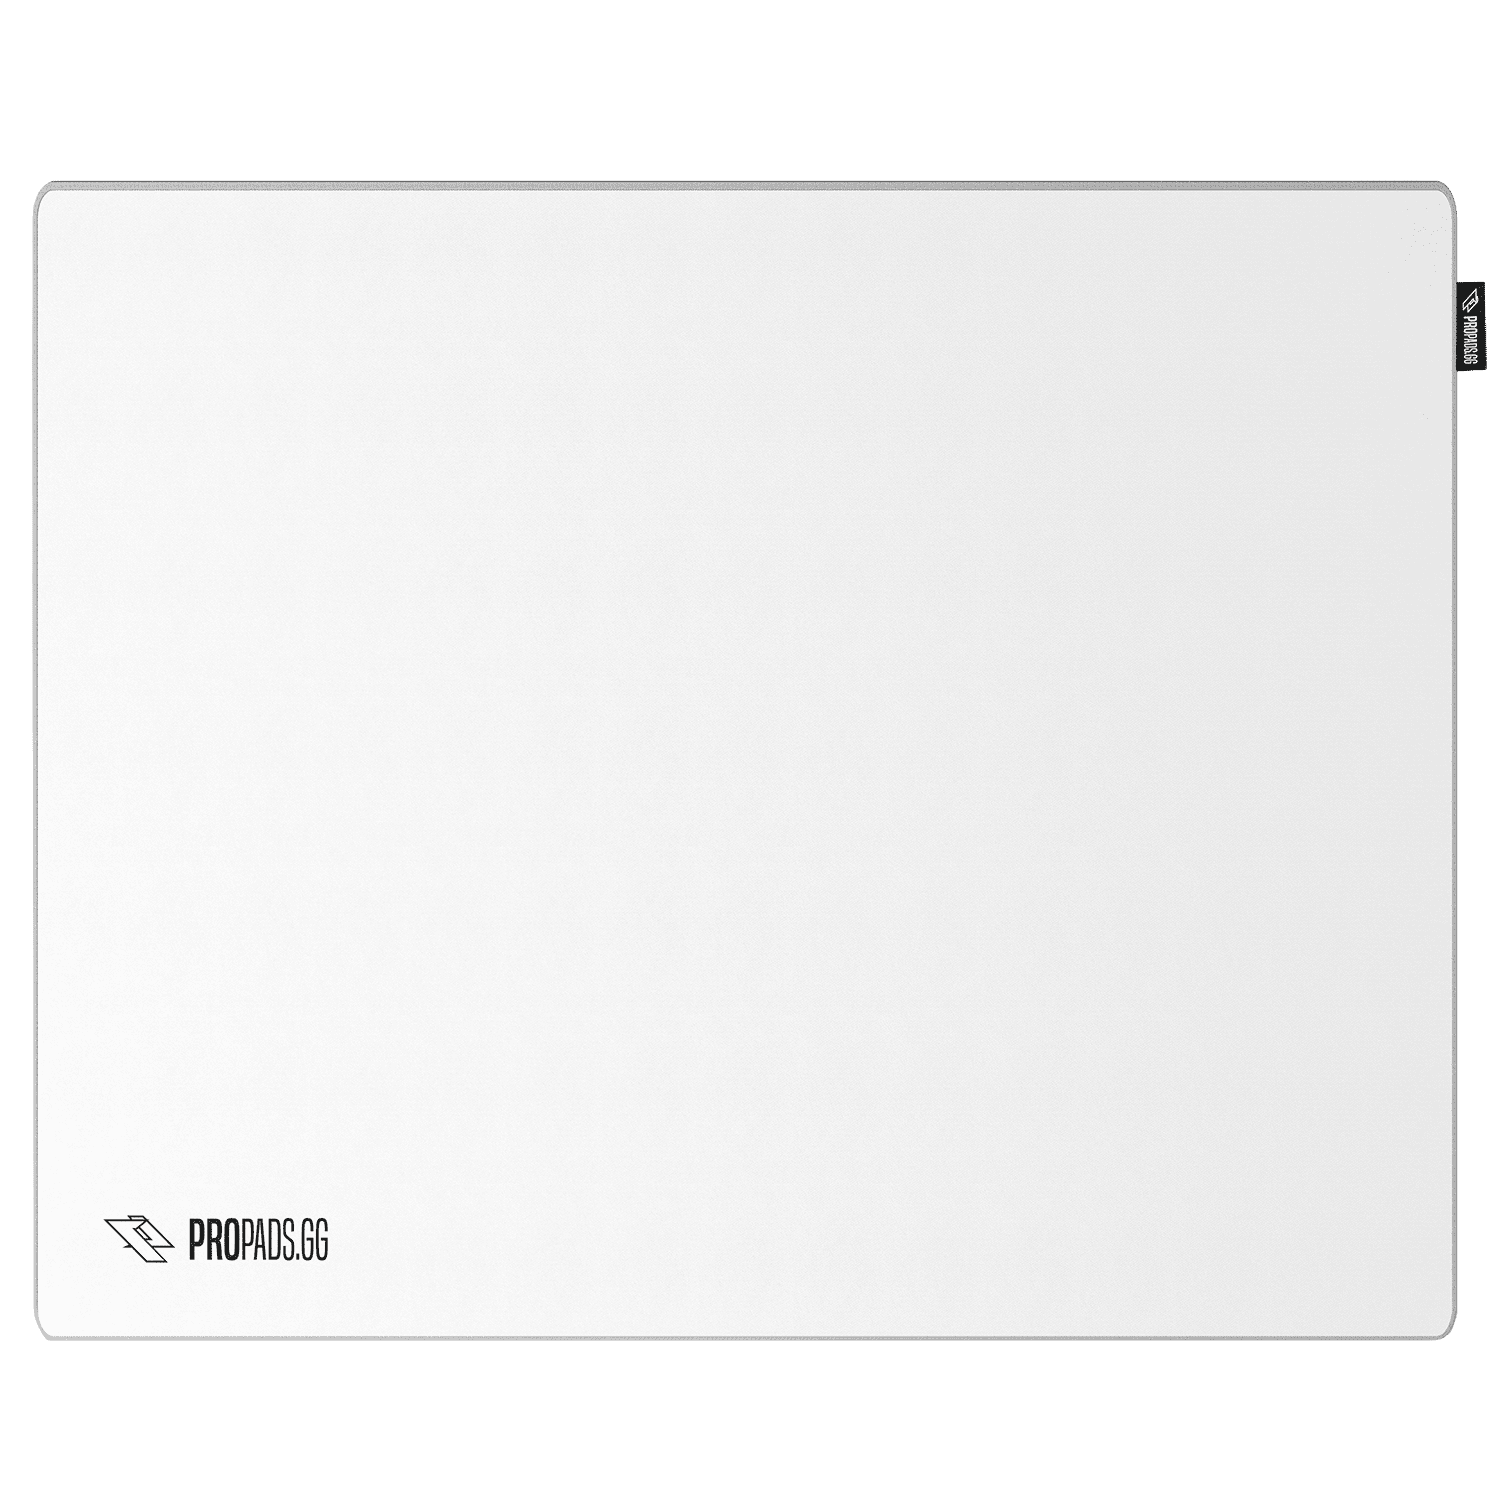 BASIC Control pad in 7 Colors